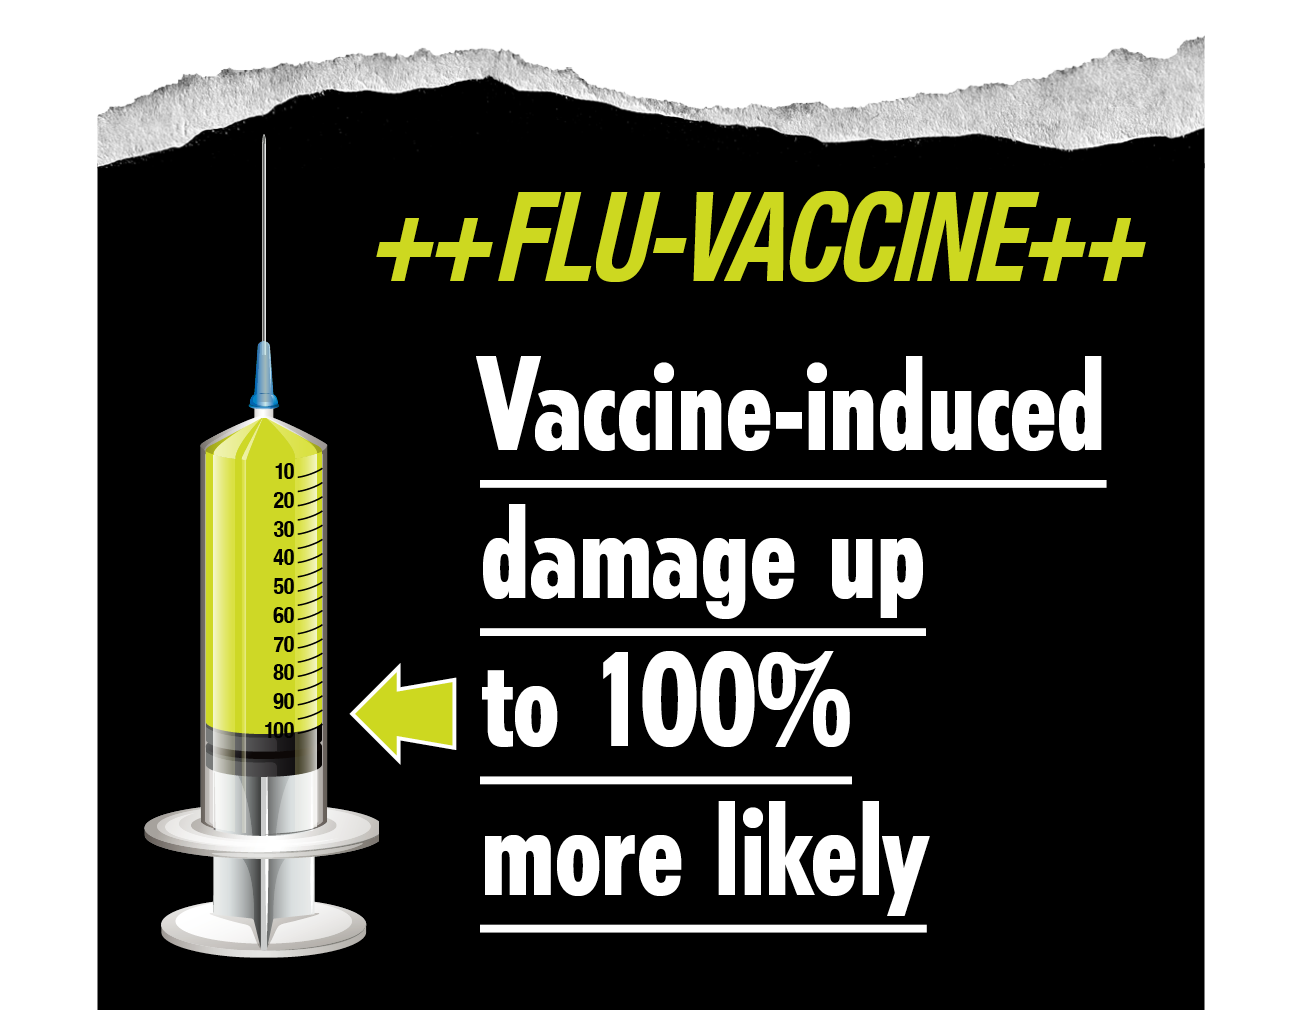 Flu-vaccine: Vaccine-induced damage up to 100% more likely